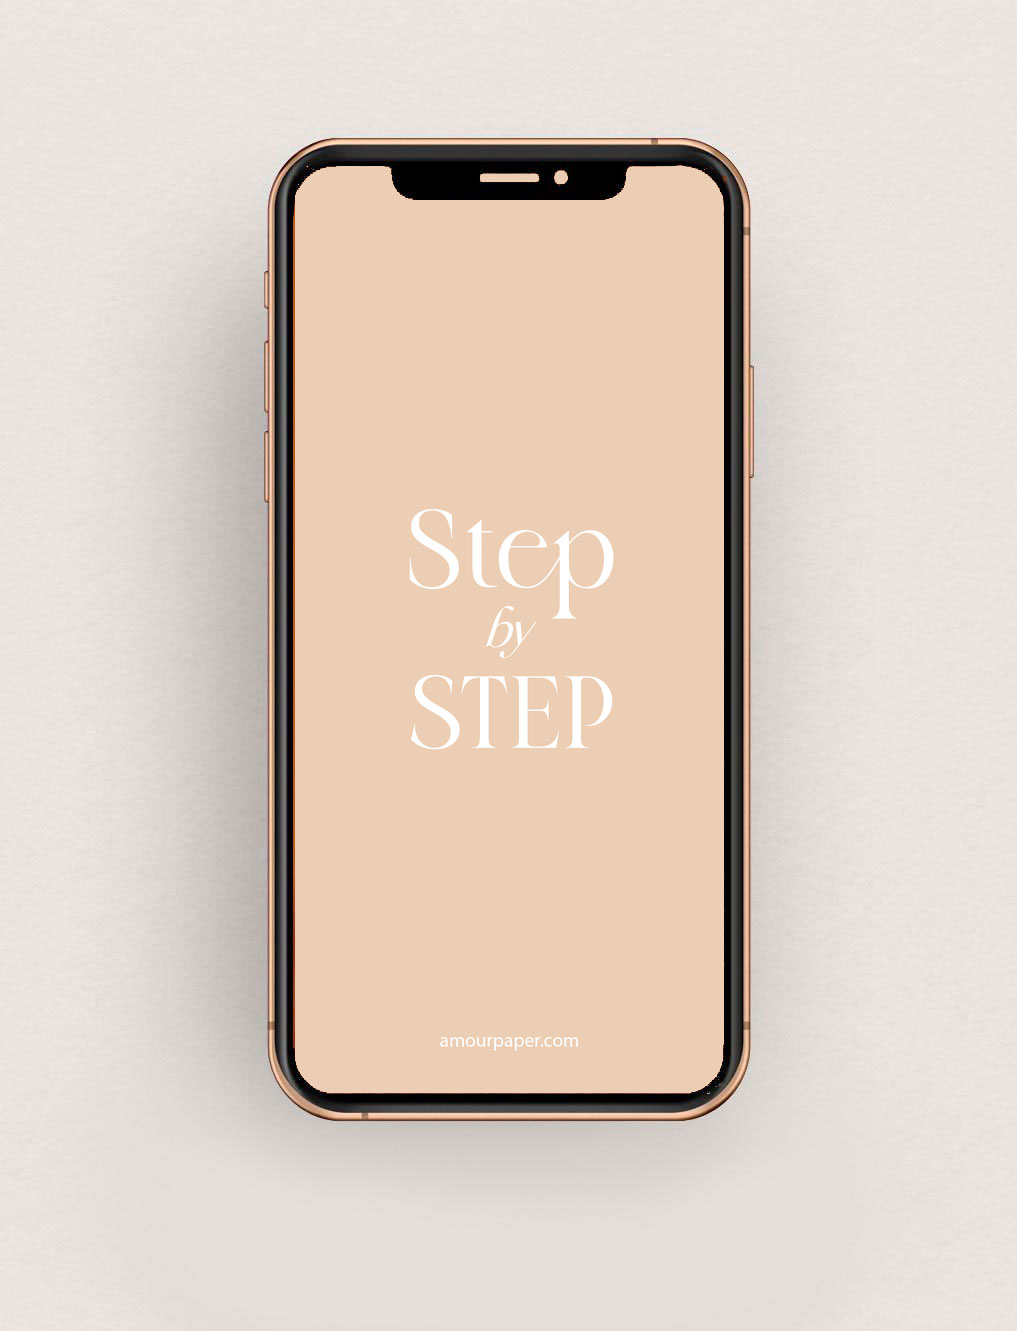 You are currently viewing Fond d’écran Step by step – Mai 2022